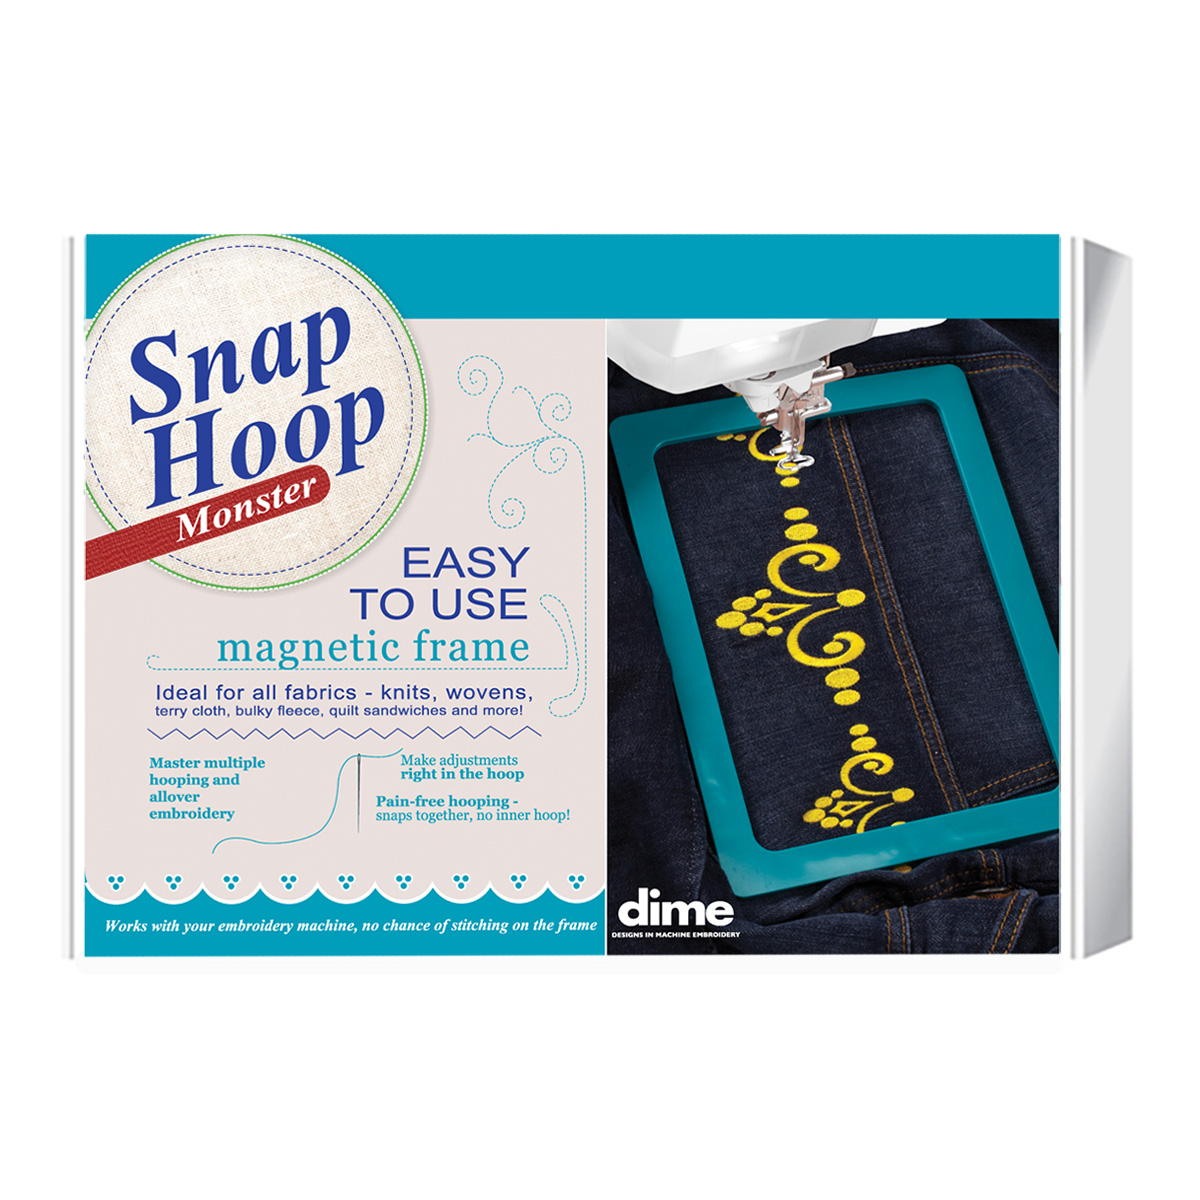 Snap Hoop Monster® Magnetic Frame Questions & Answers